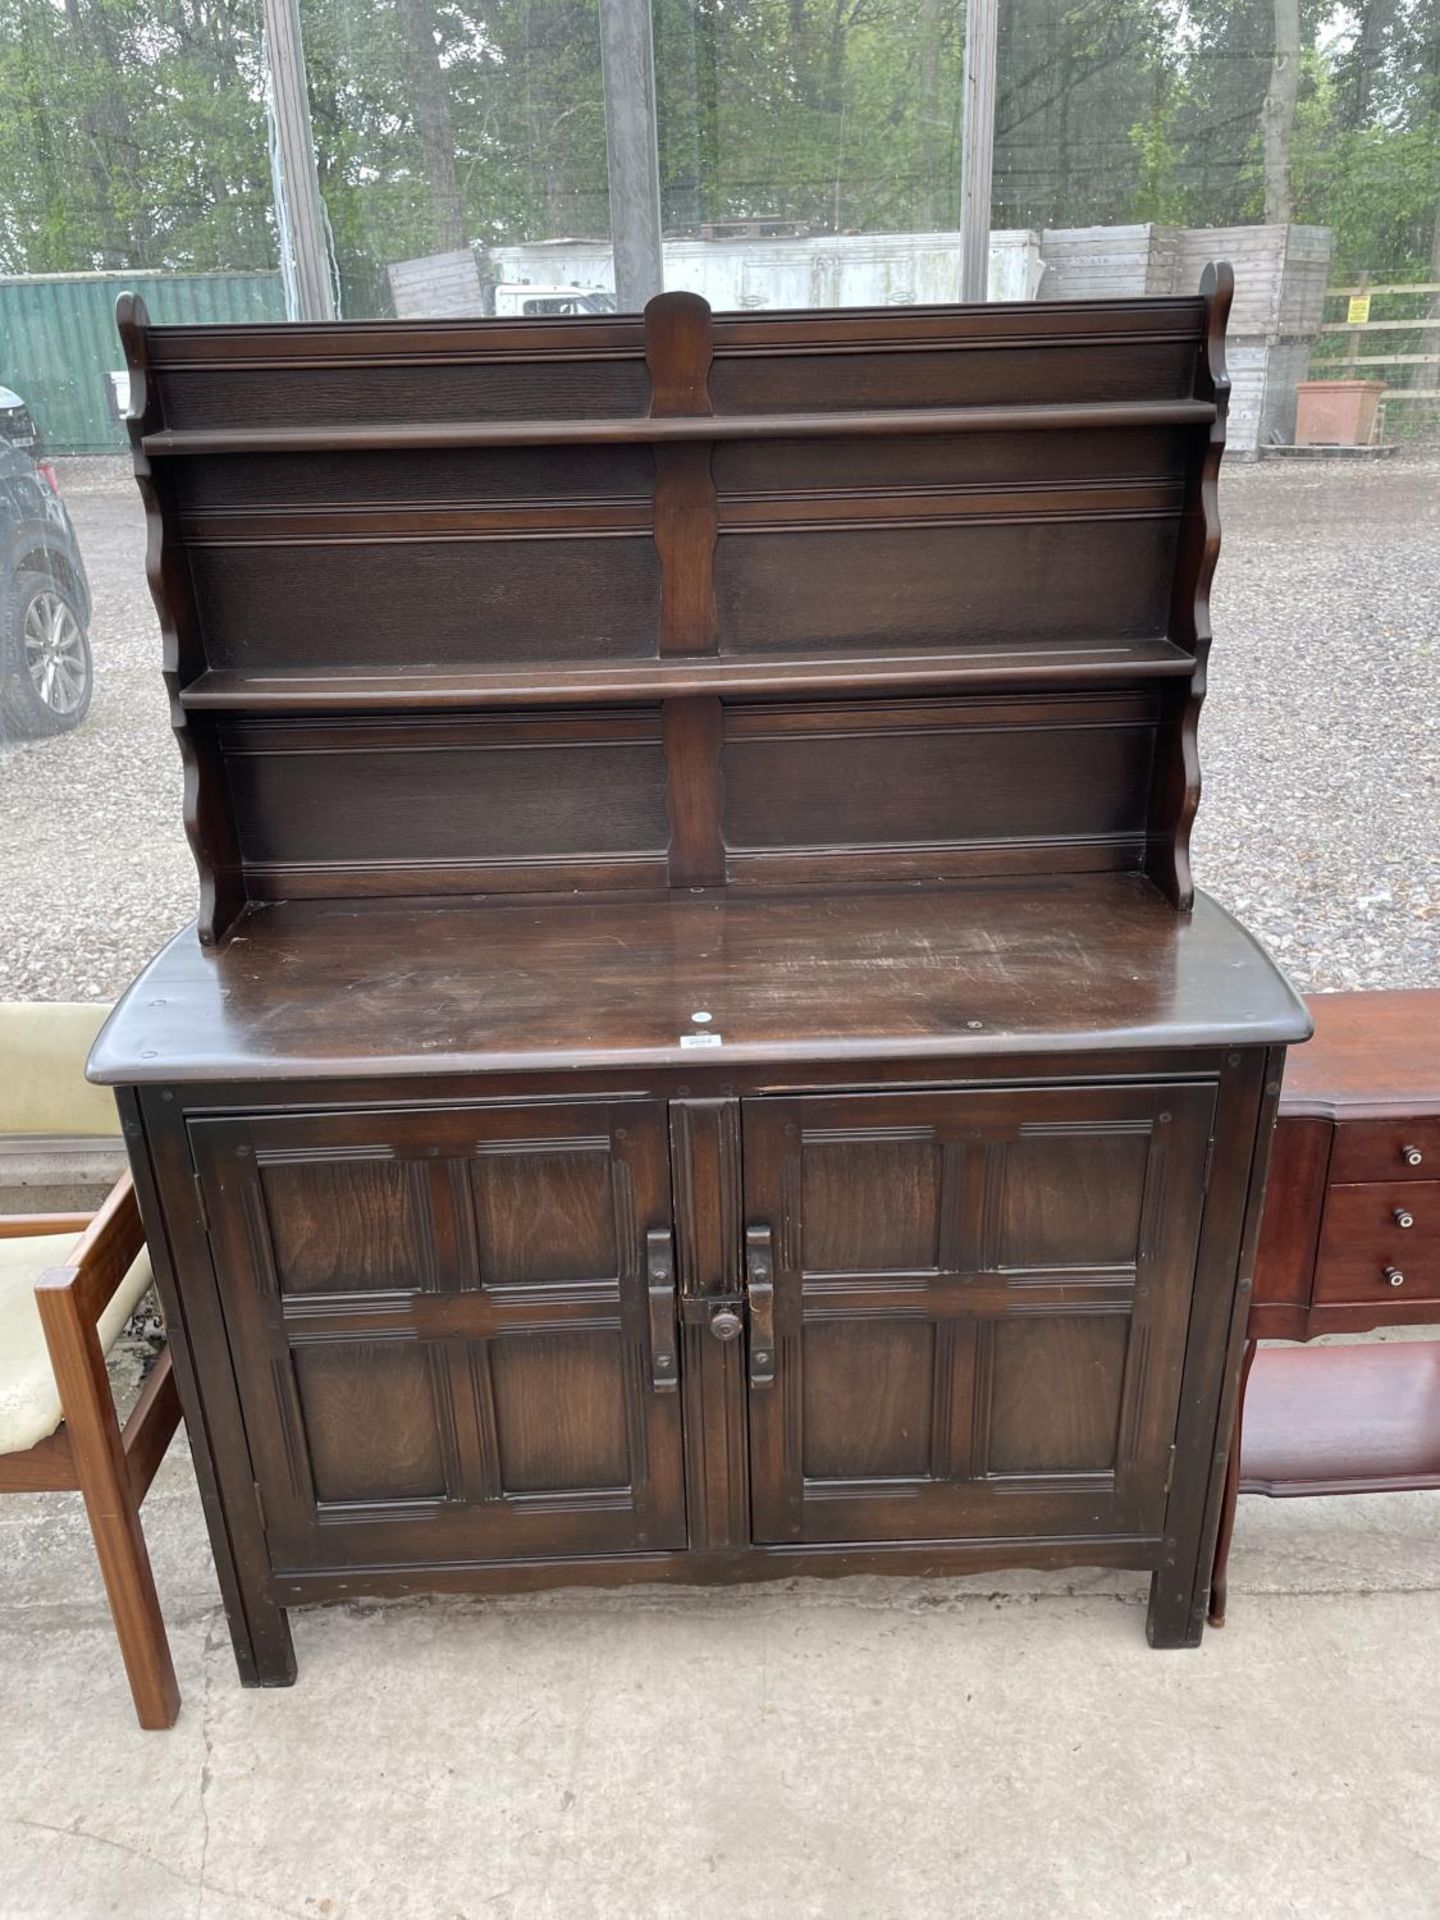 AN ERCOL STYLE DRESSER COMPLETE WITH PLATE RACK - 49" WIDE